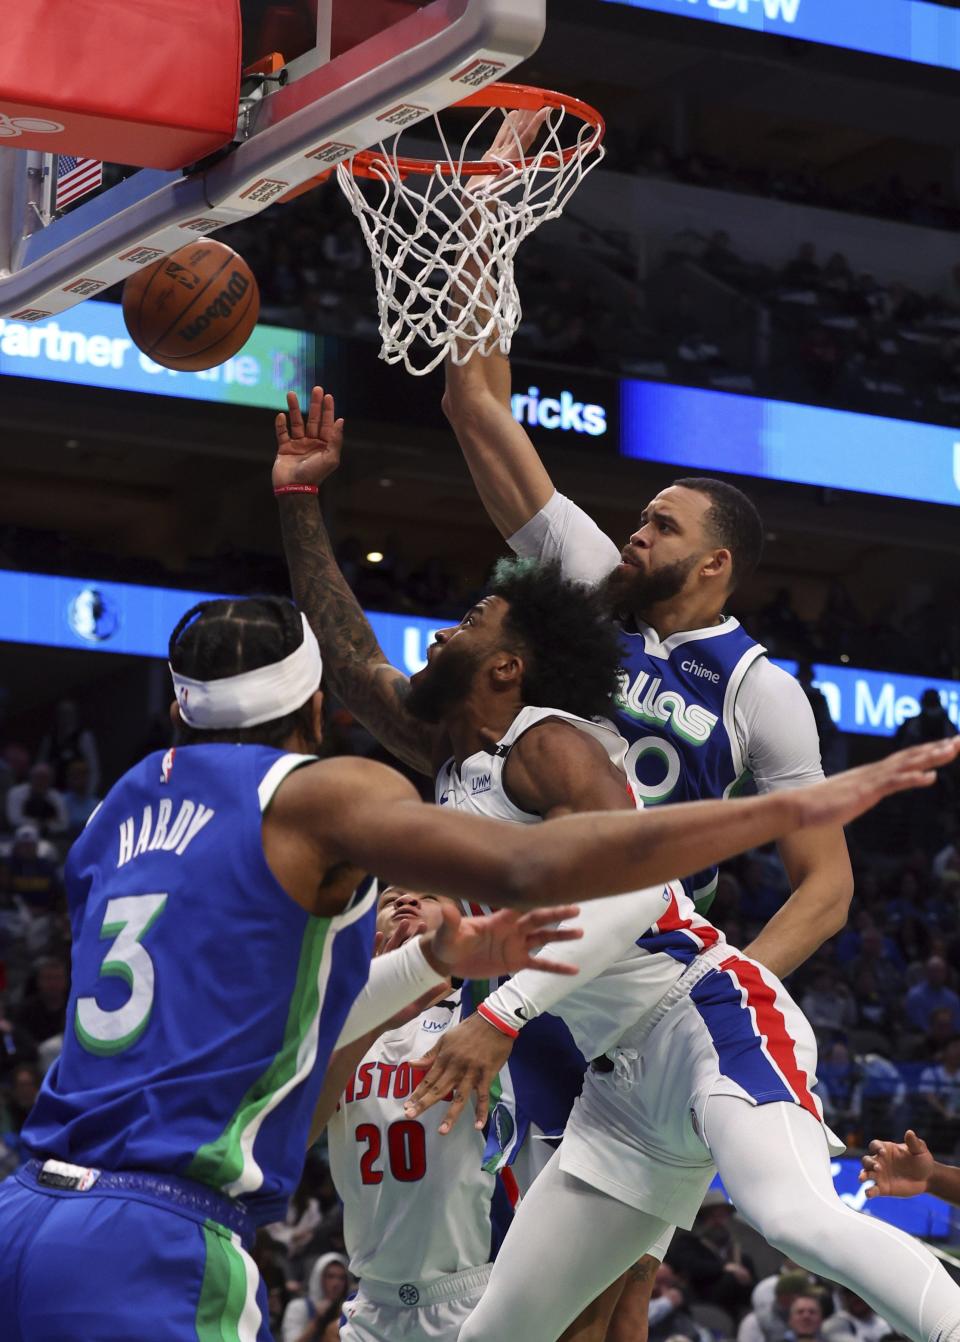 Pistons forward Saddiq Bey, center, shoots against Mavericks center JaVale McGee, right, and guard Jaden Hardy (3) in the first half on Monday, Jan. 30, 2023, in Dallas.